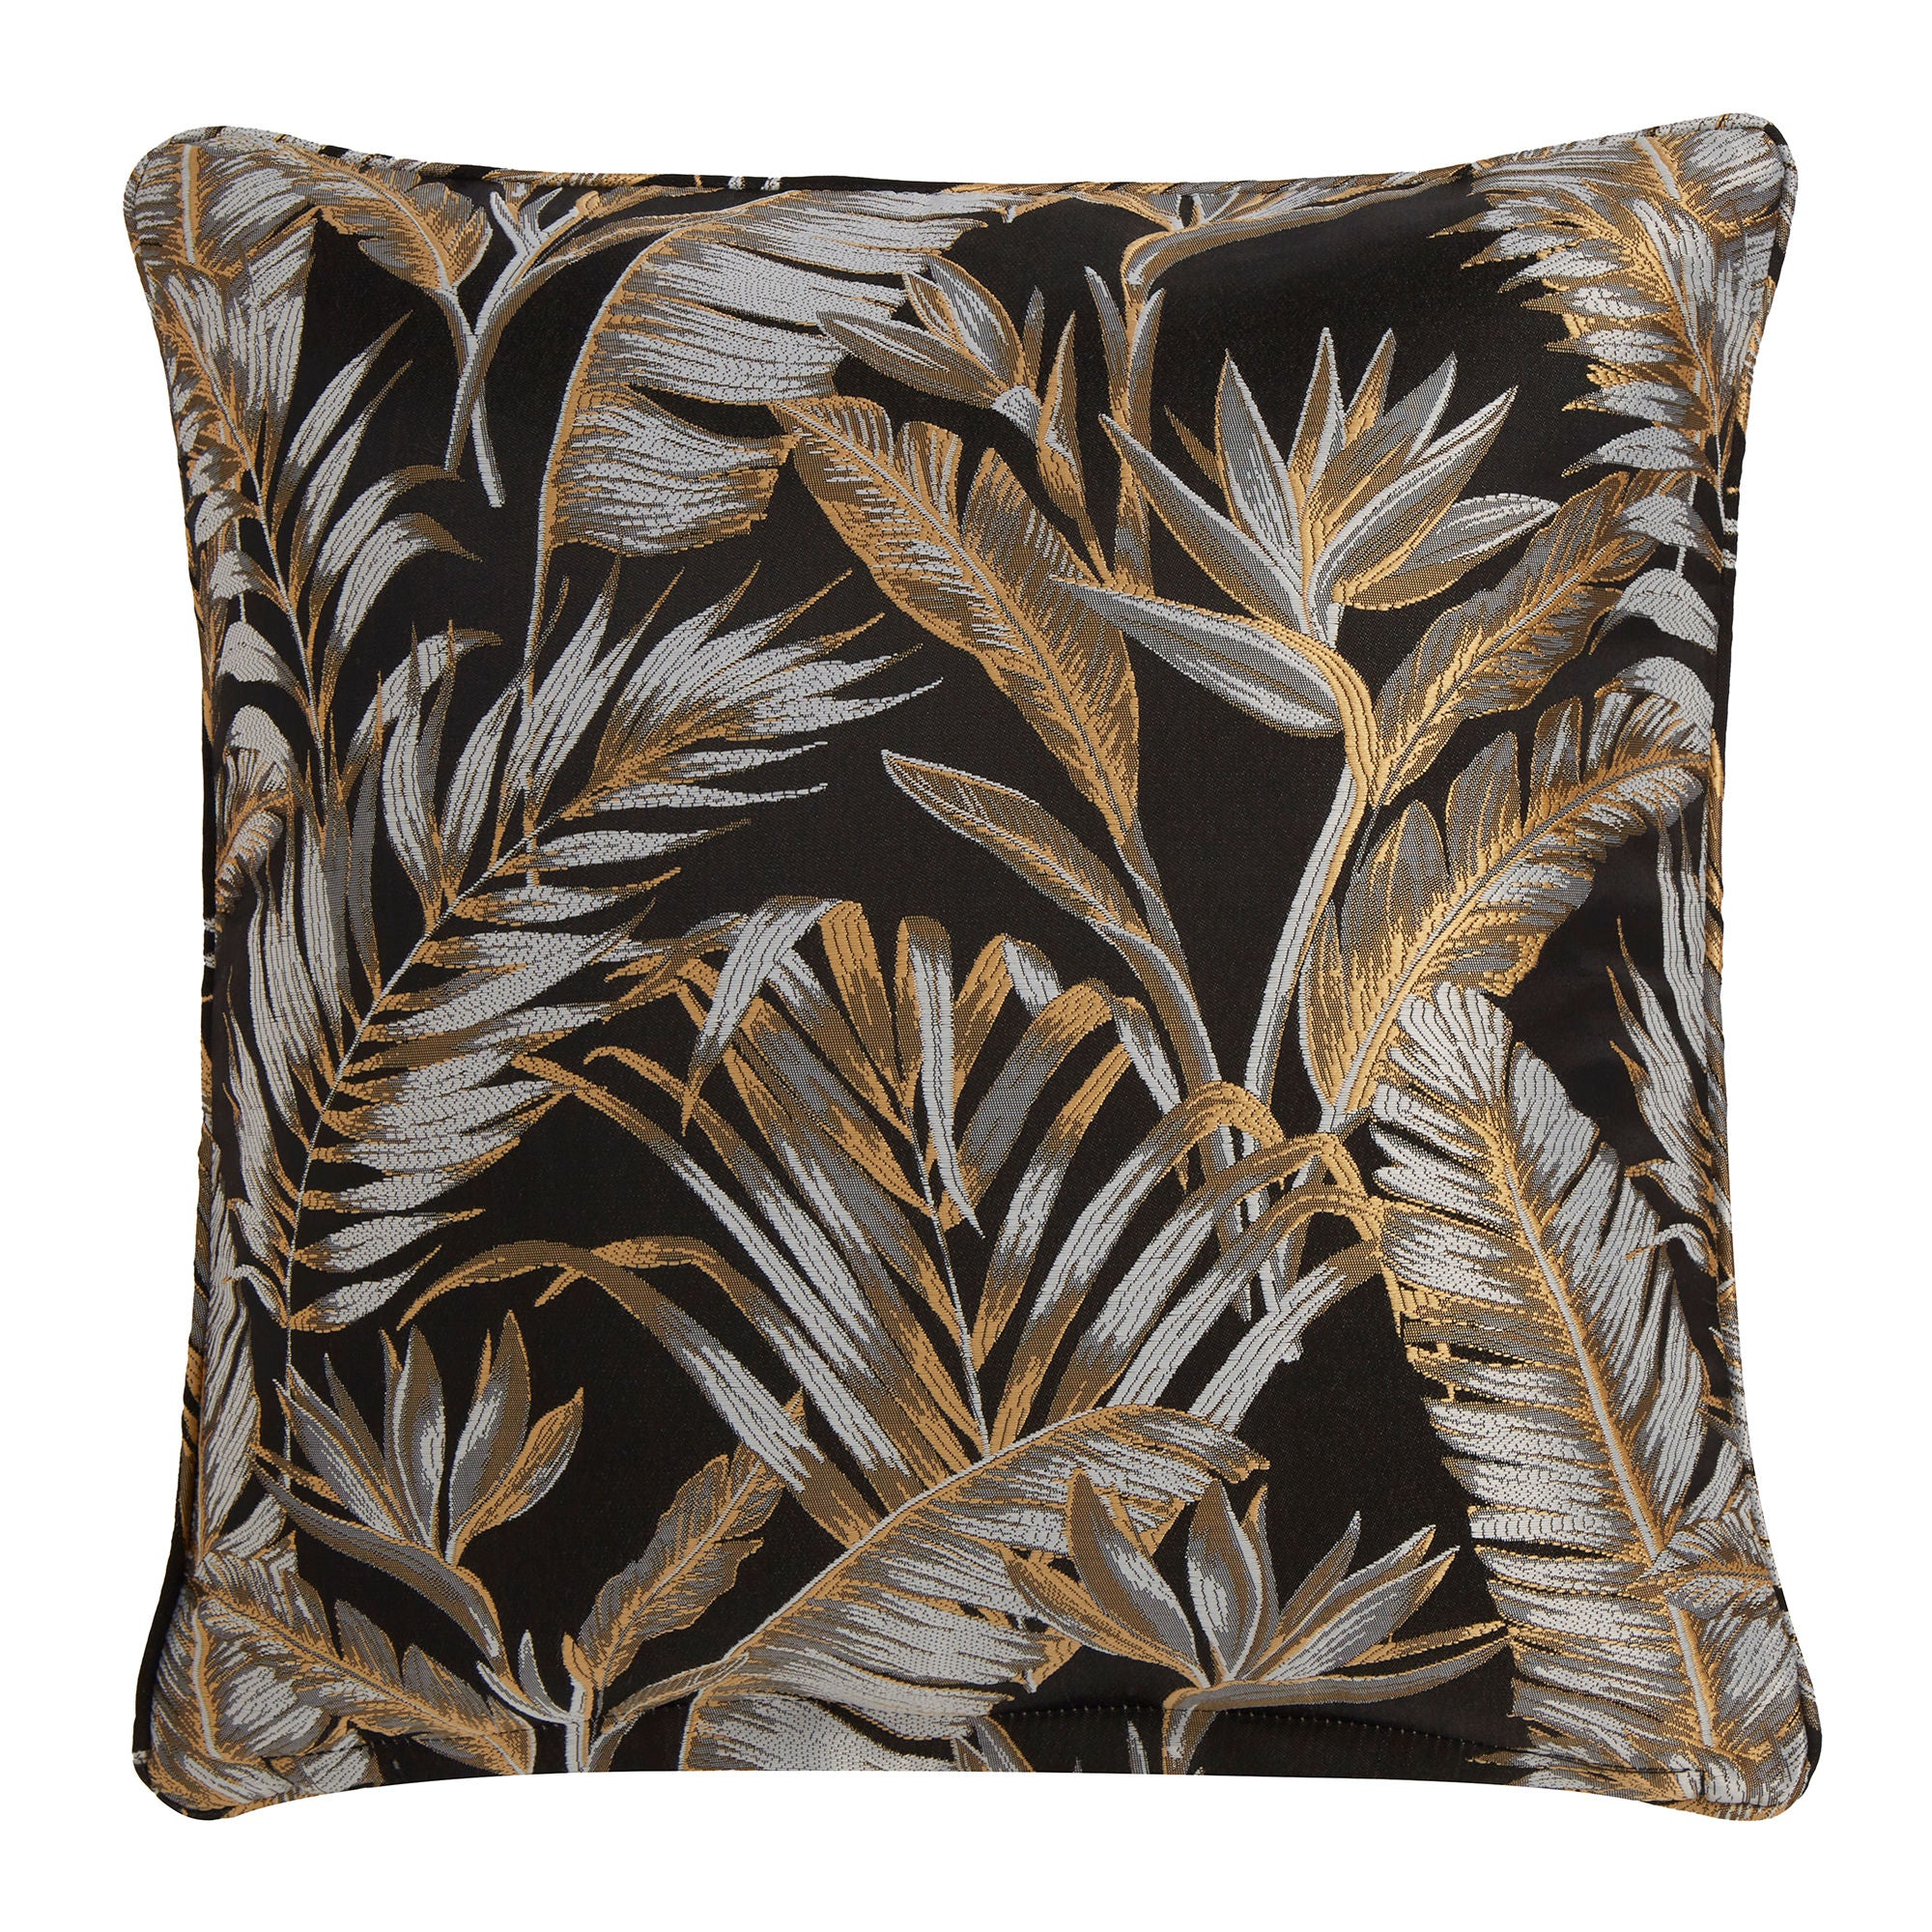 Paradise Palm Cushion by Laurence Llewelyn-Bowen in Black 43 x 43cm - Cushion - Laurence Llewelyn-Bowen